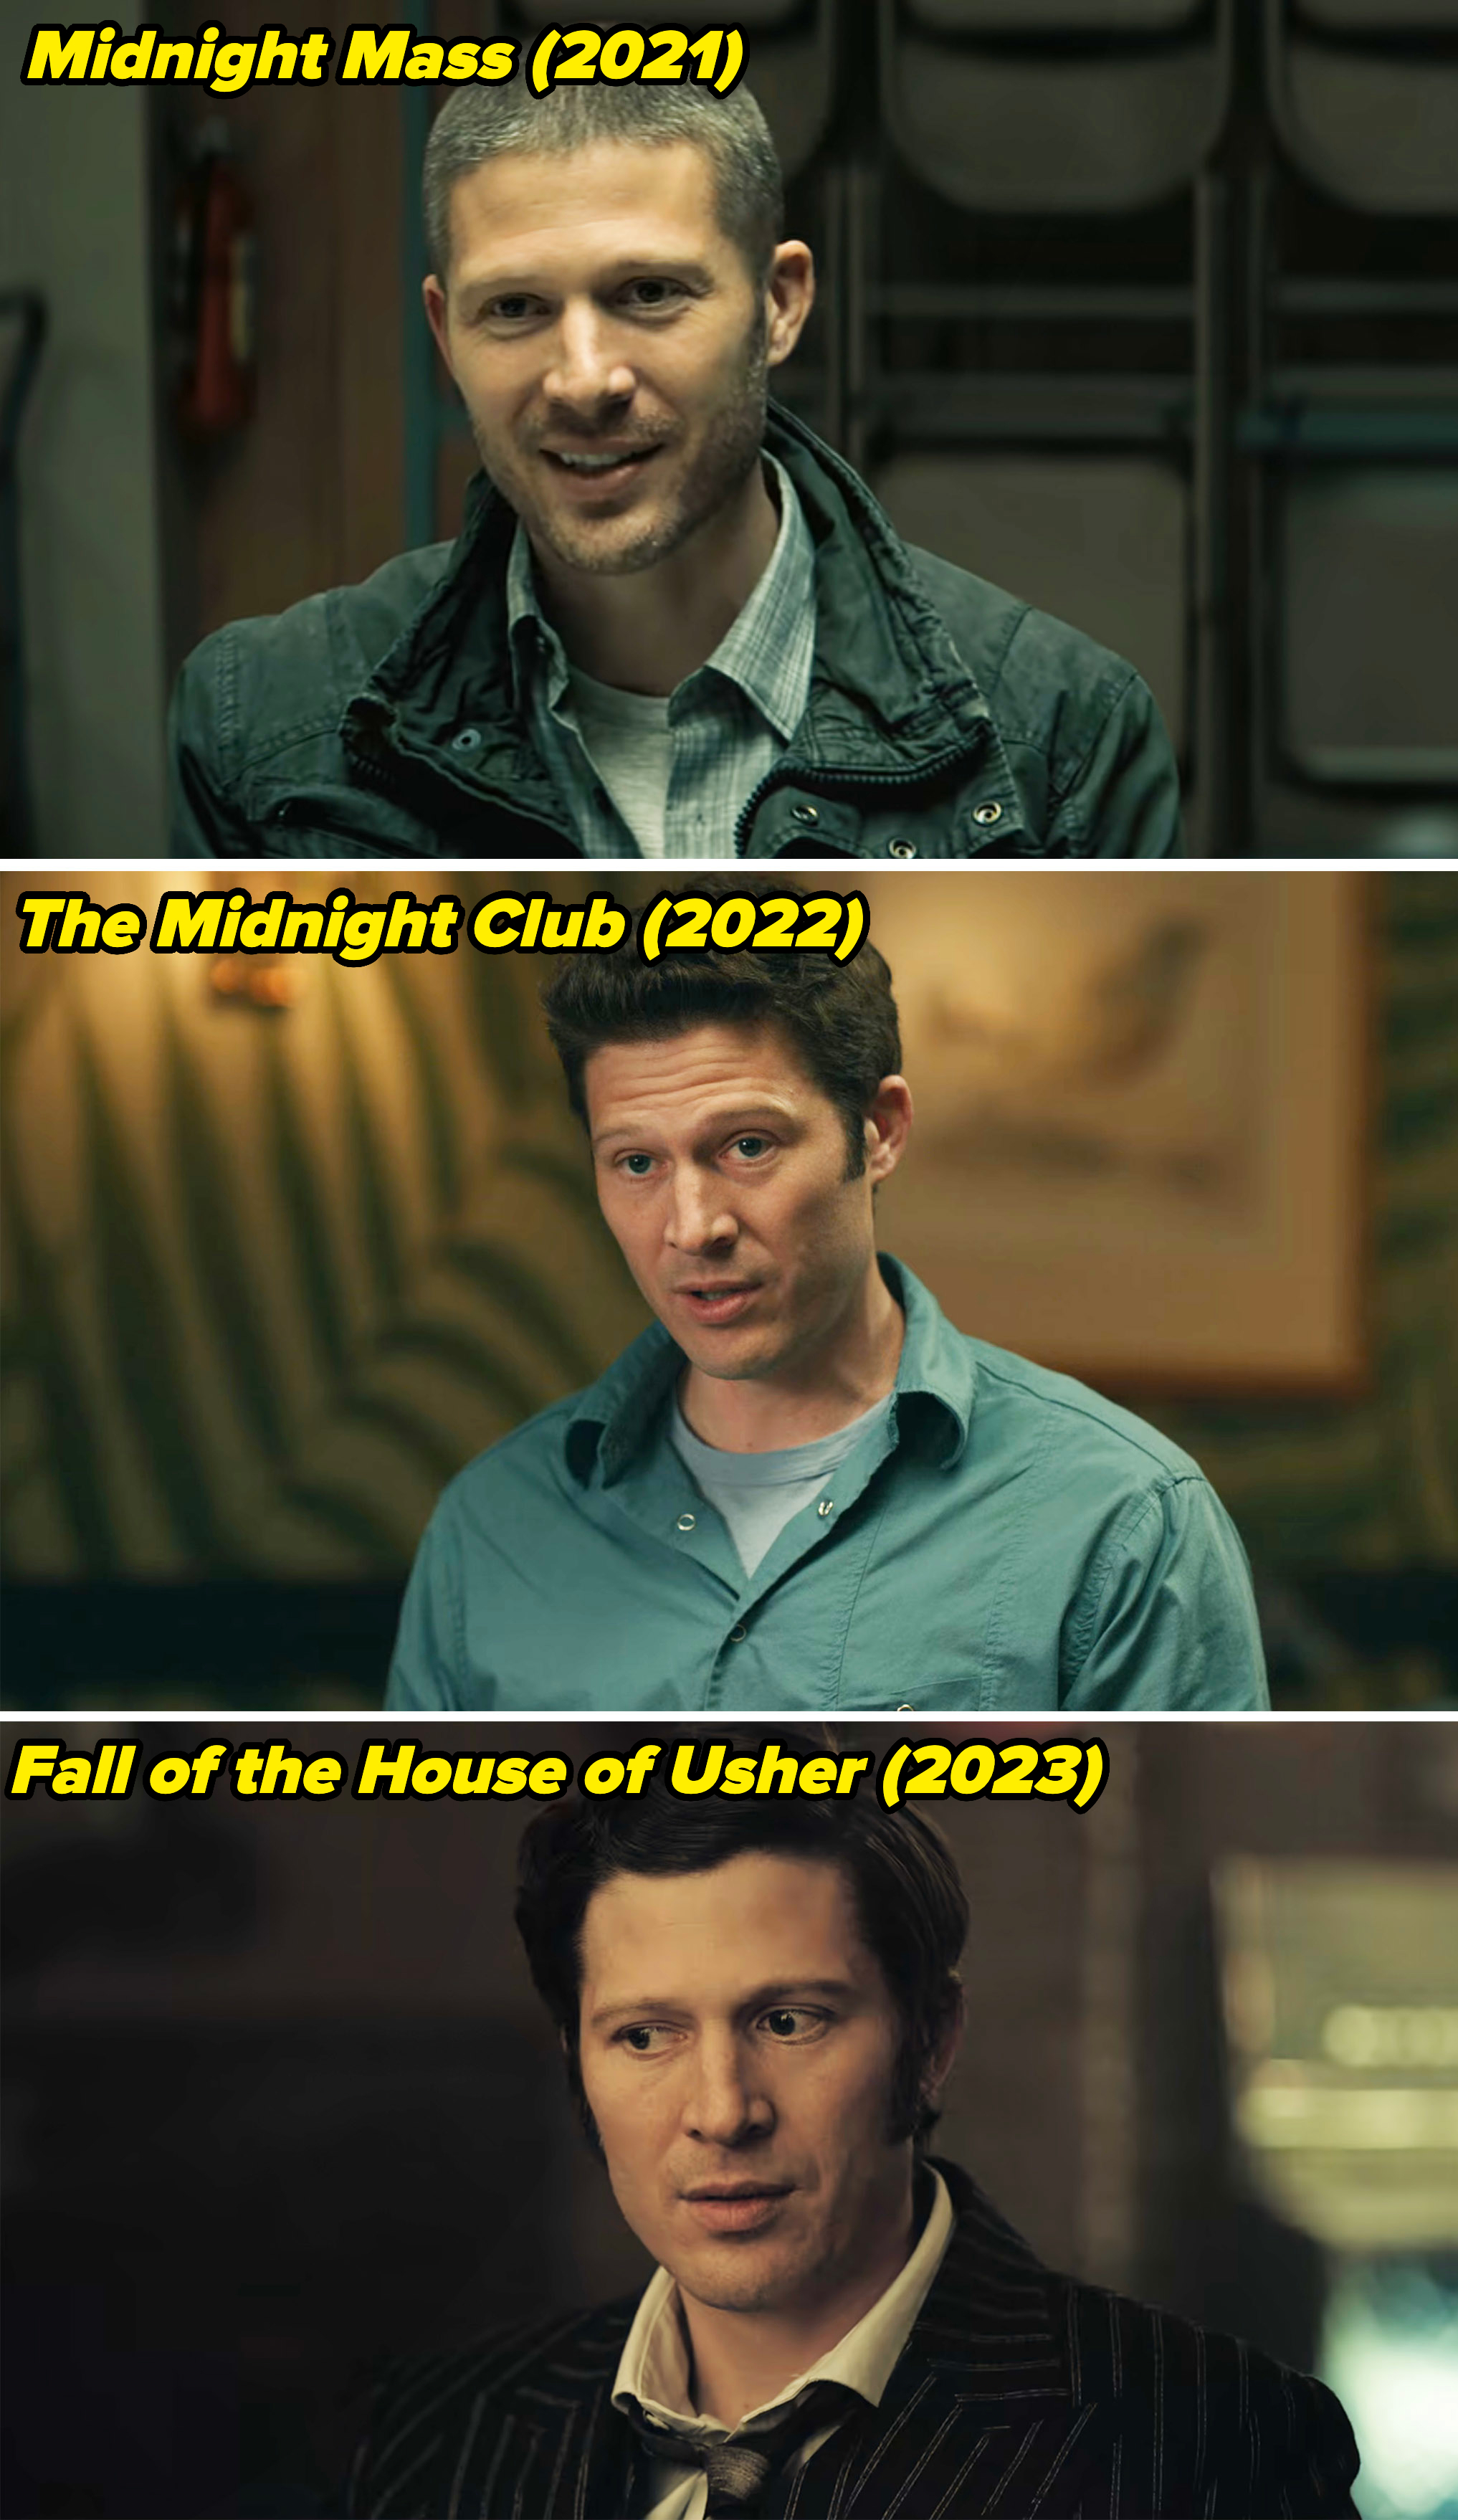 Zach Gilford in various projects